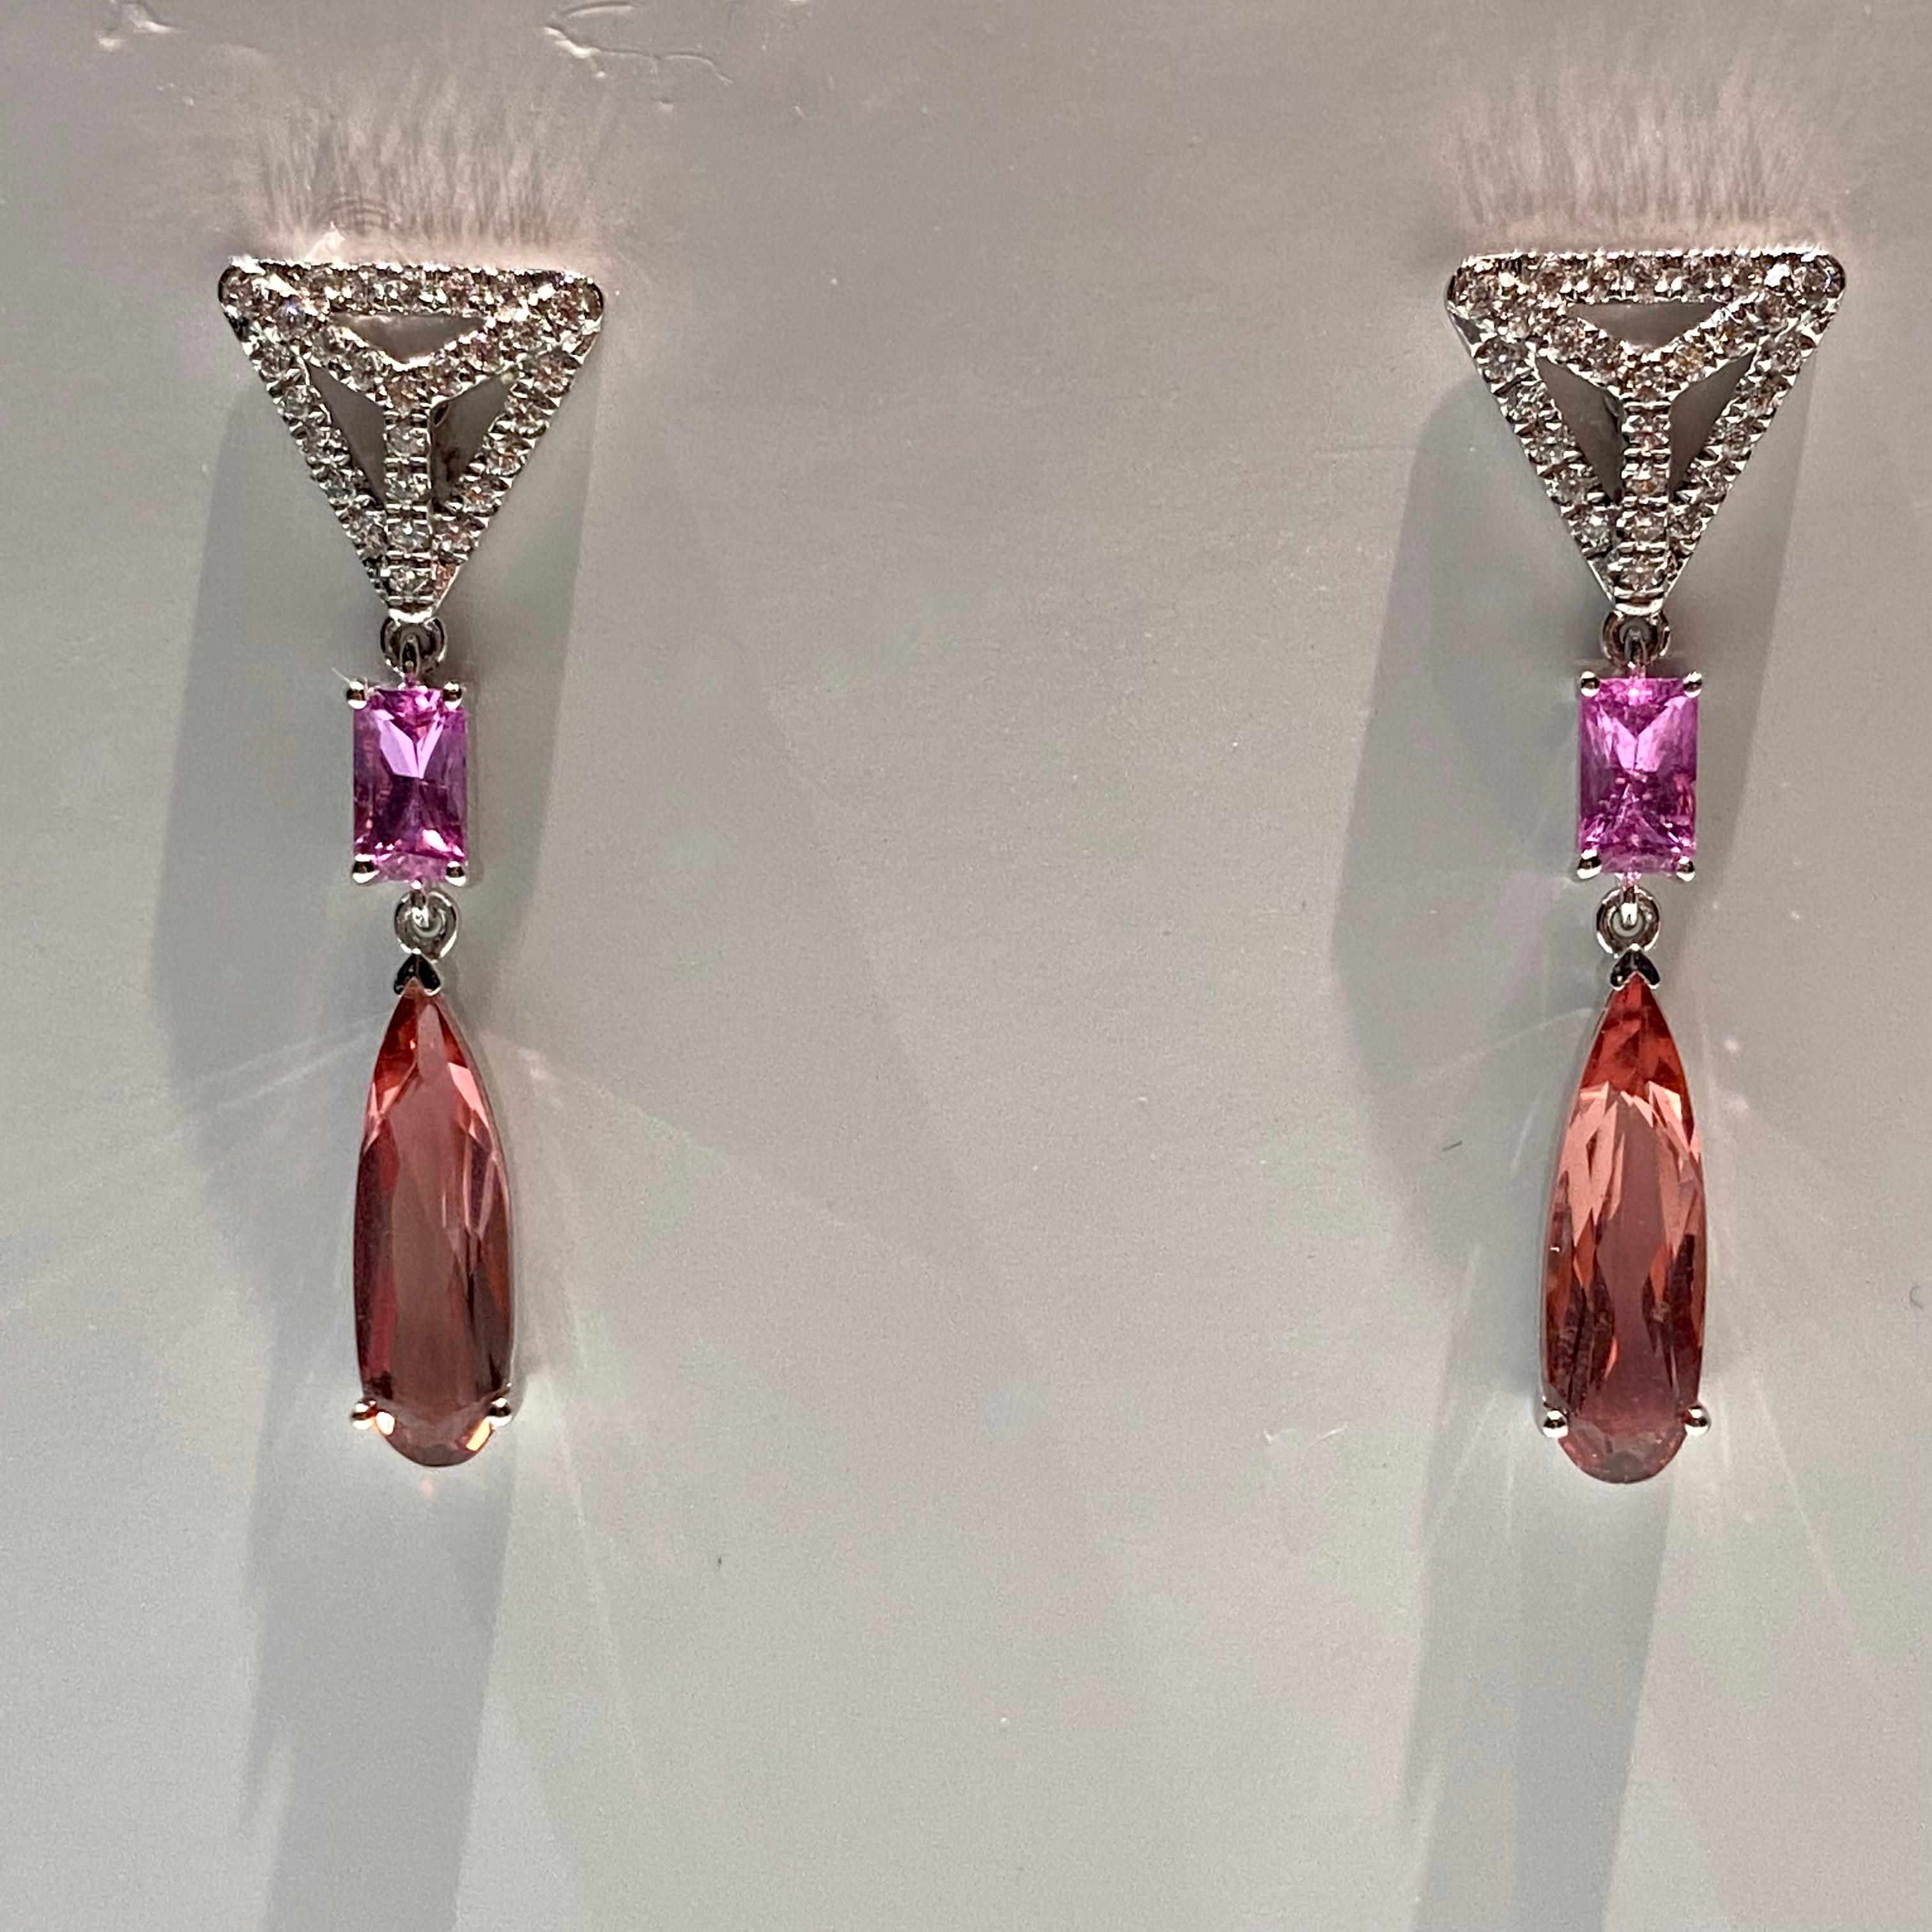 A pair of Art Deco Style earring. On each side of the earring there is a diamond encrusted triangle motif, followed by a Rectangle Pink Sapphire. Underneath the Sapphire dangles a elongated rain drop shape Tourmaline. This is a vintage style and is